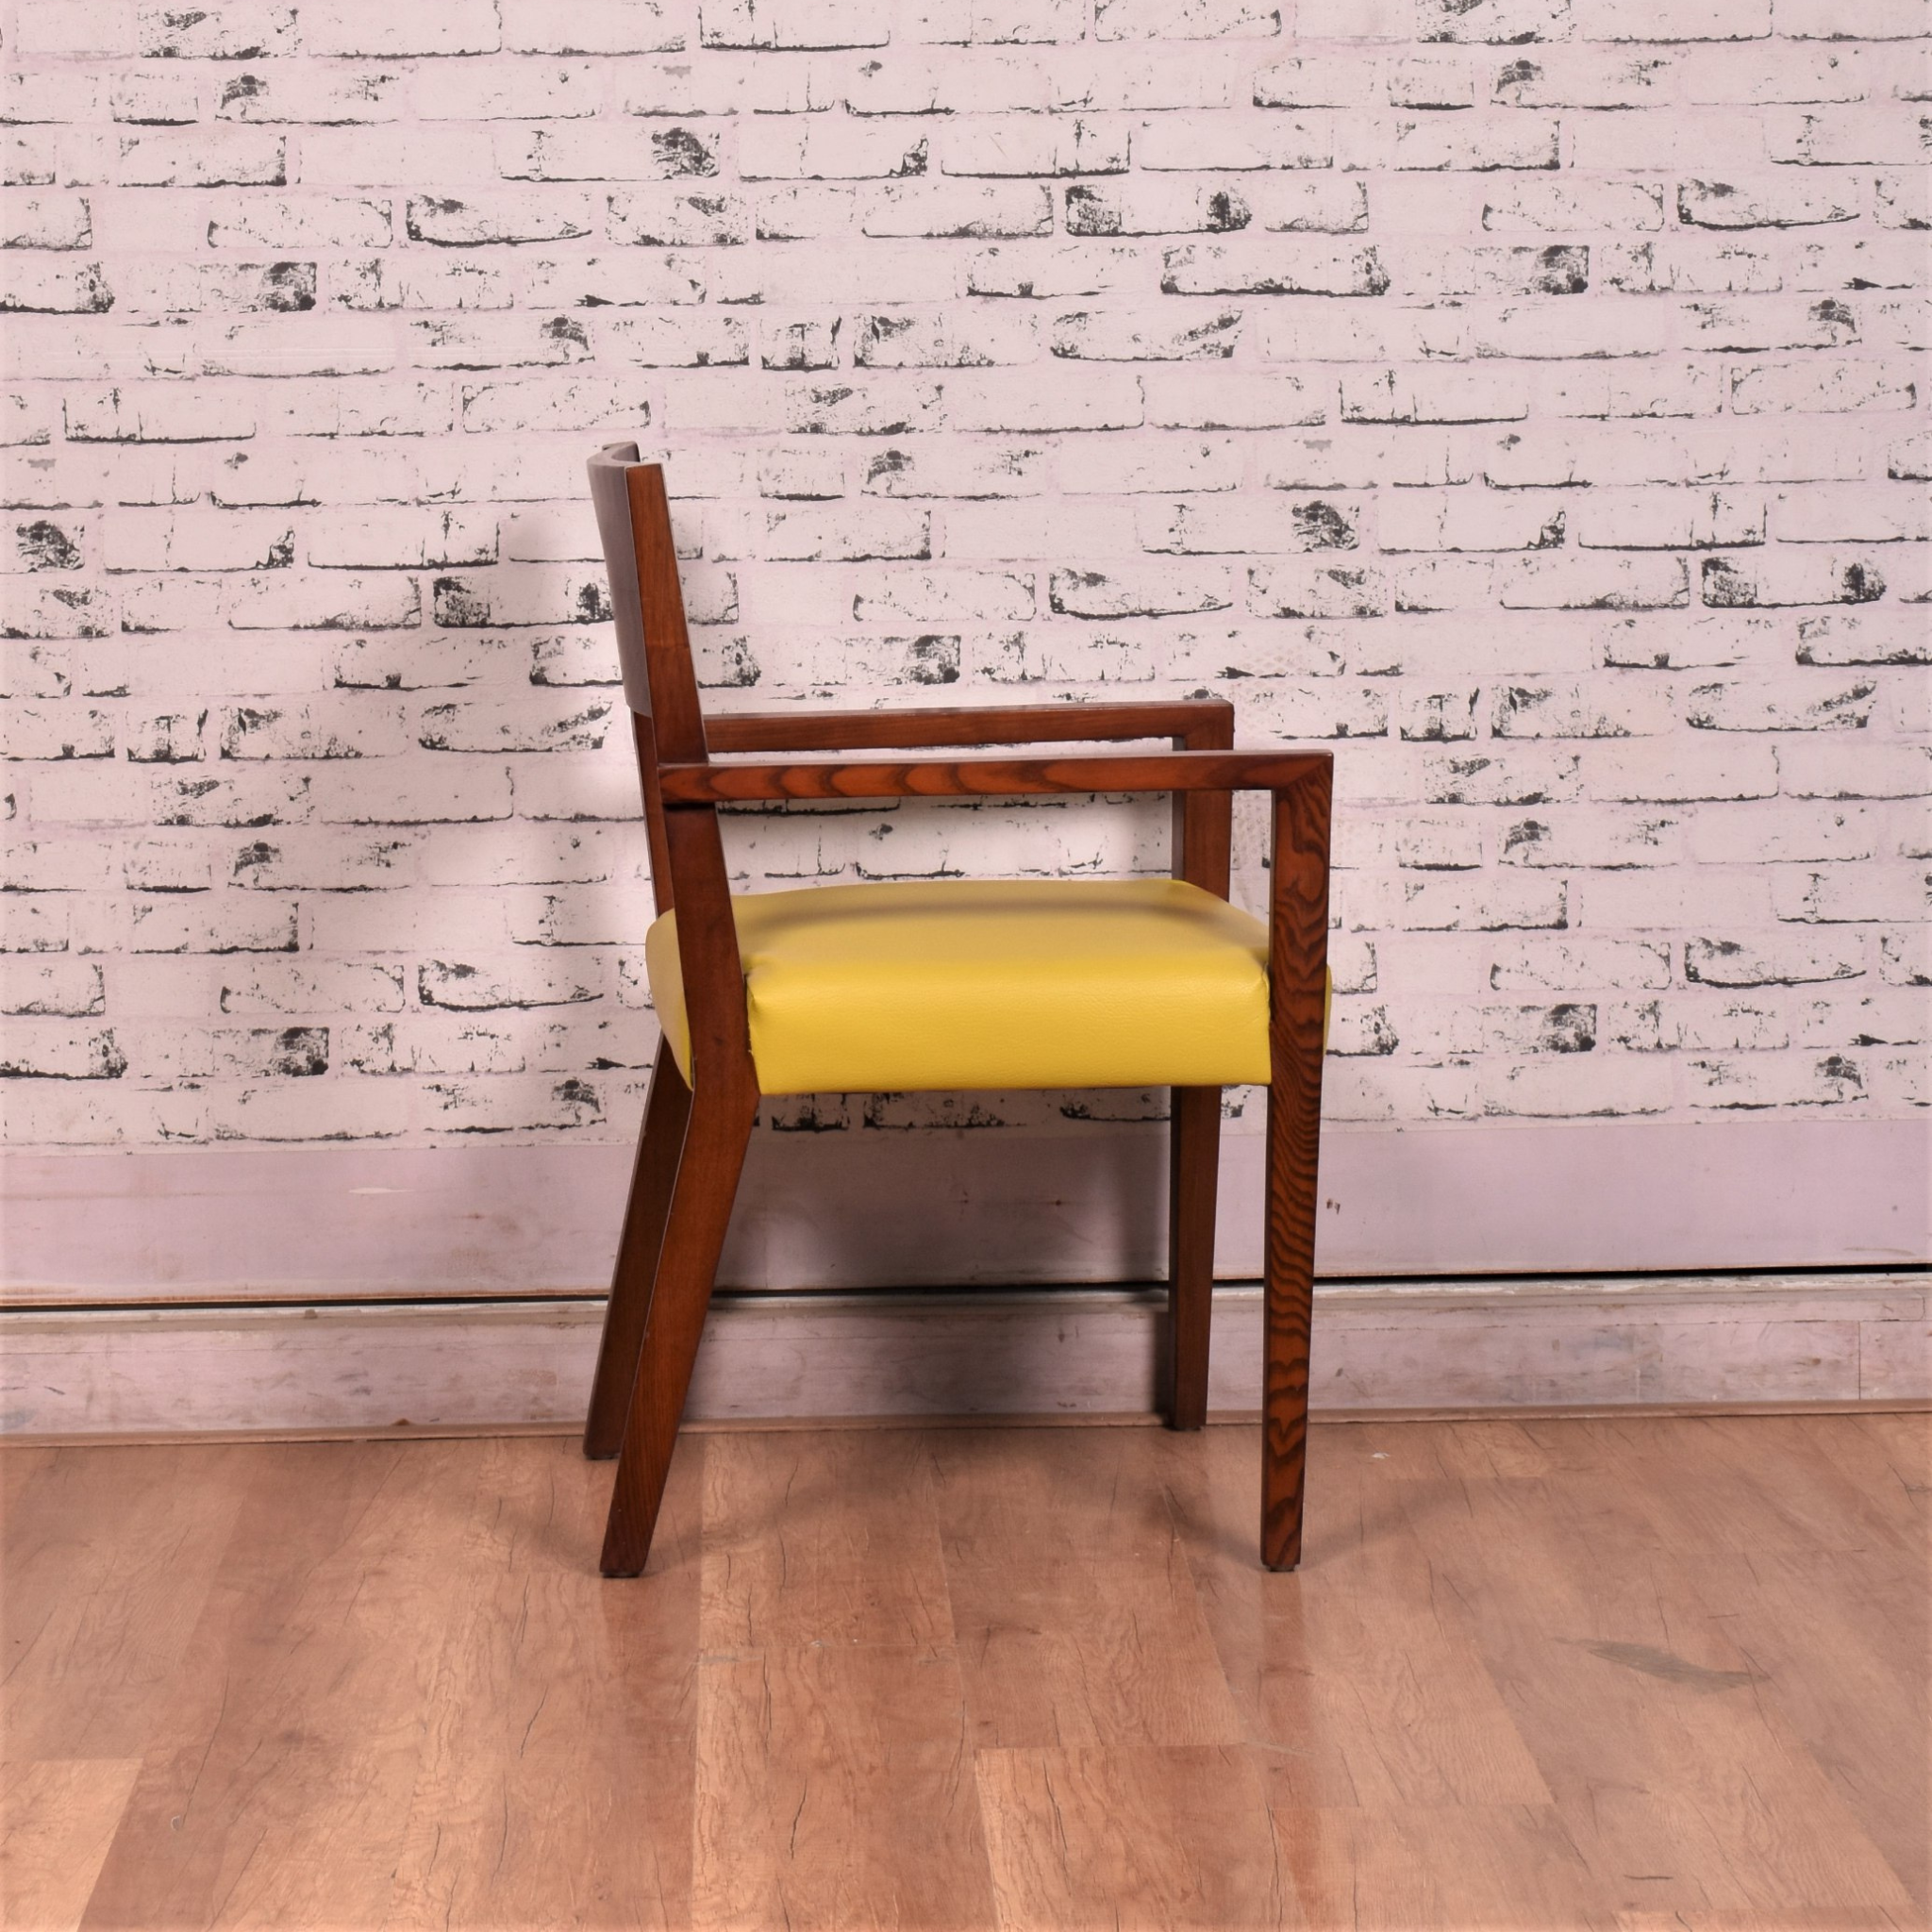 Annette Dining Chair